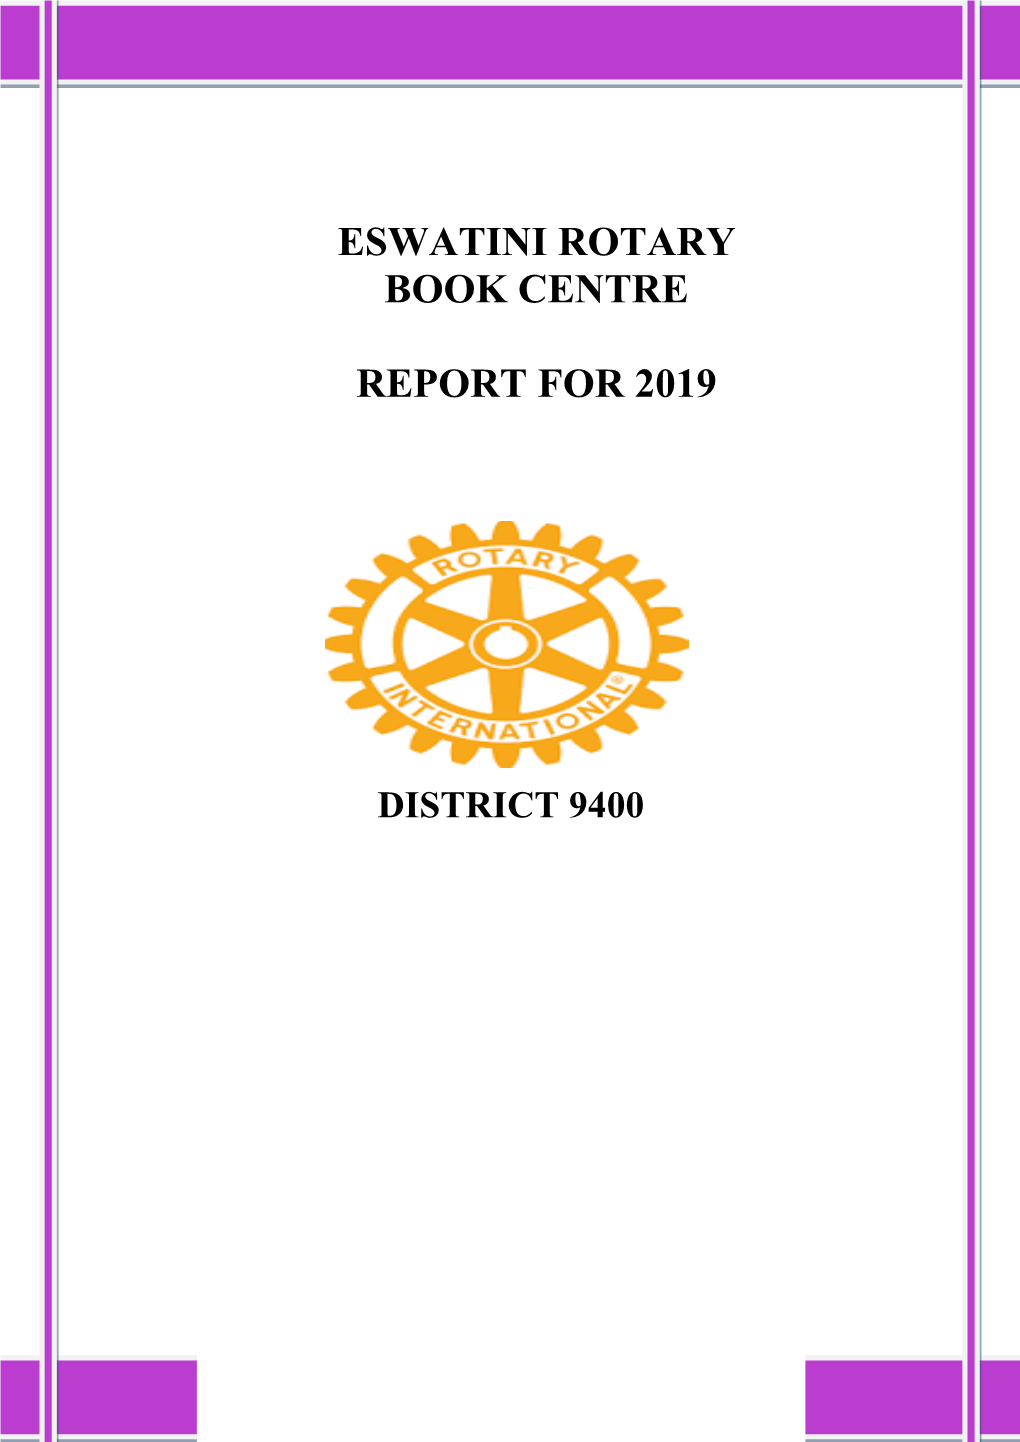 Eswatini Rotary Book Centre Report for 2019